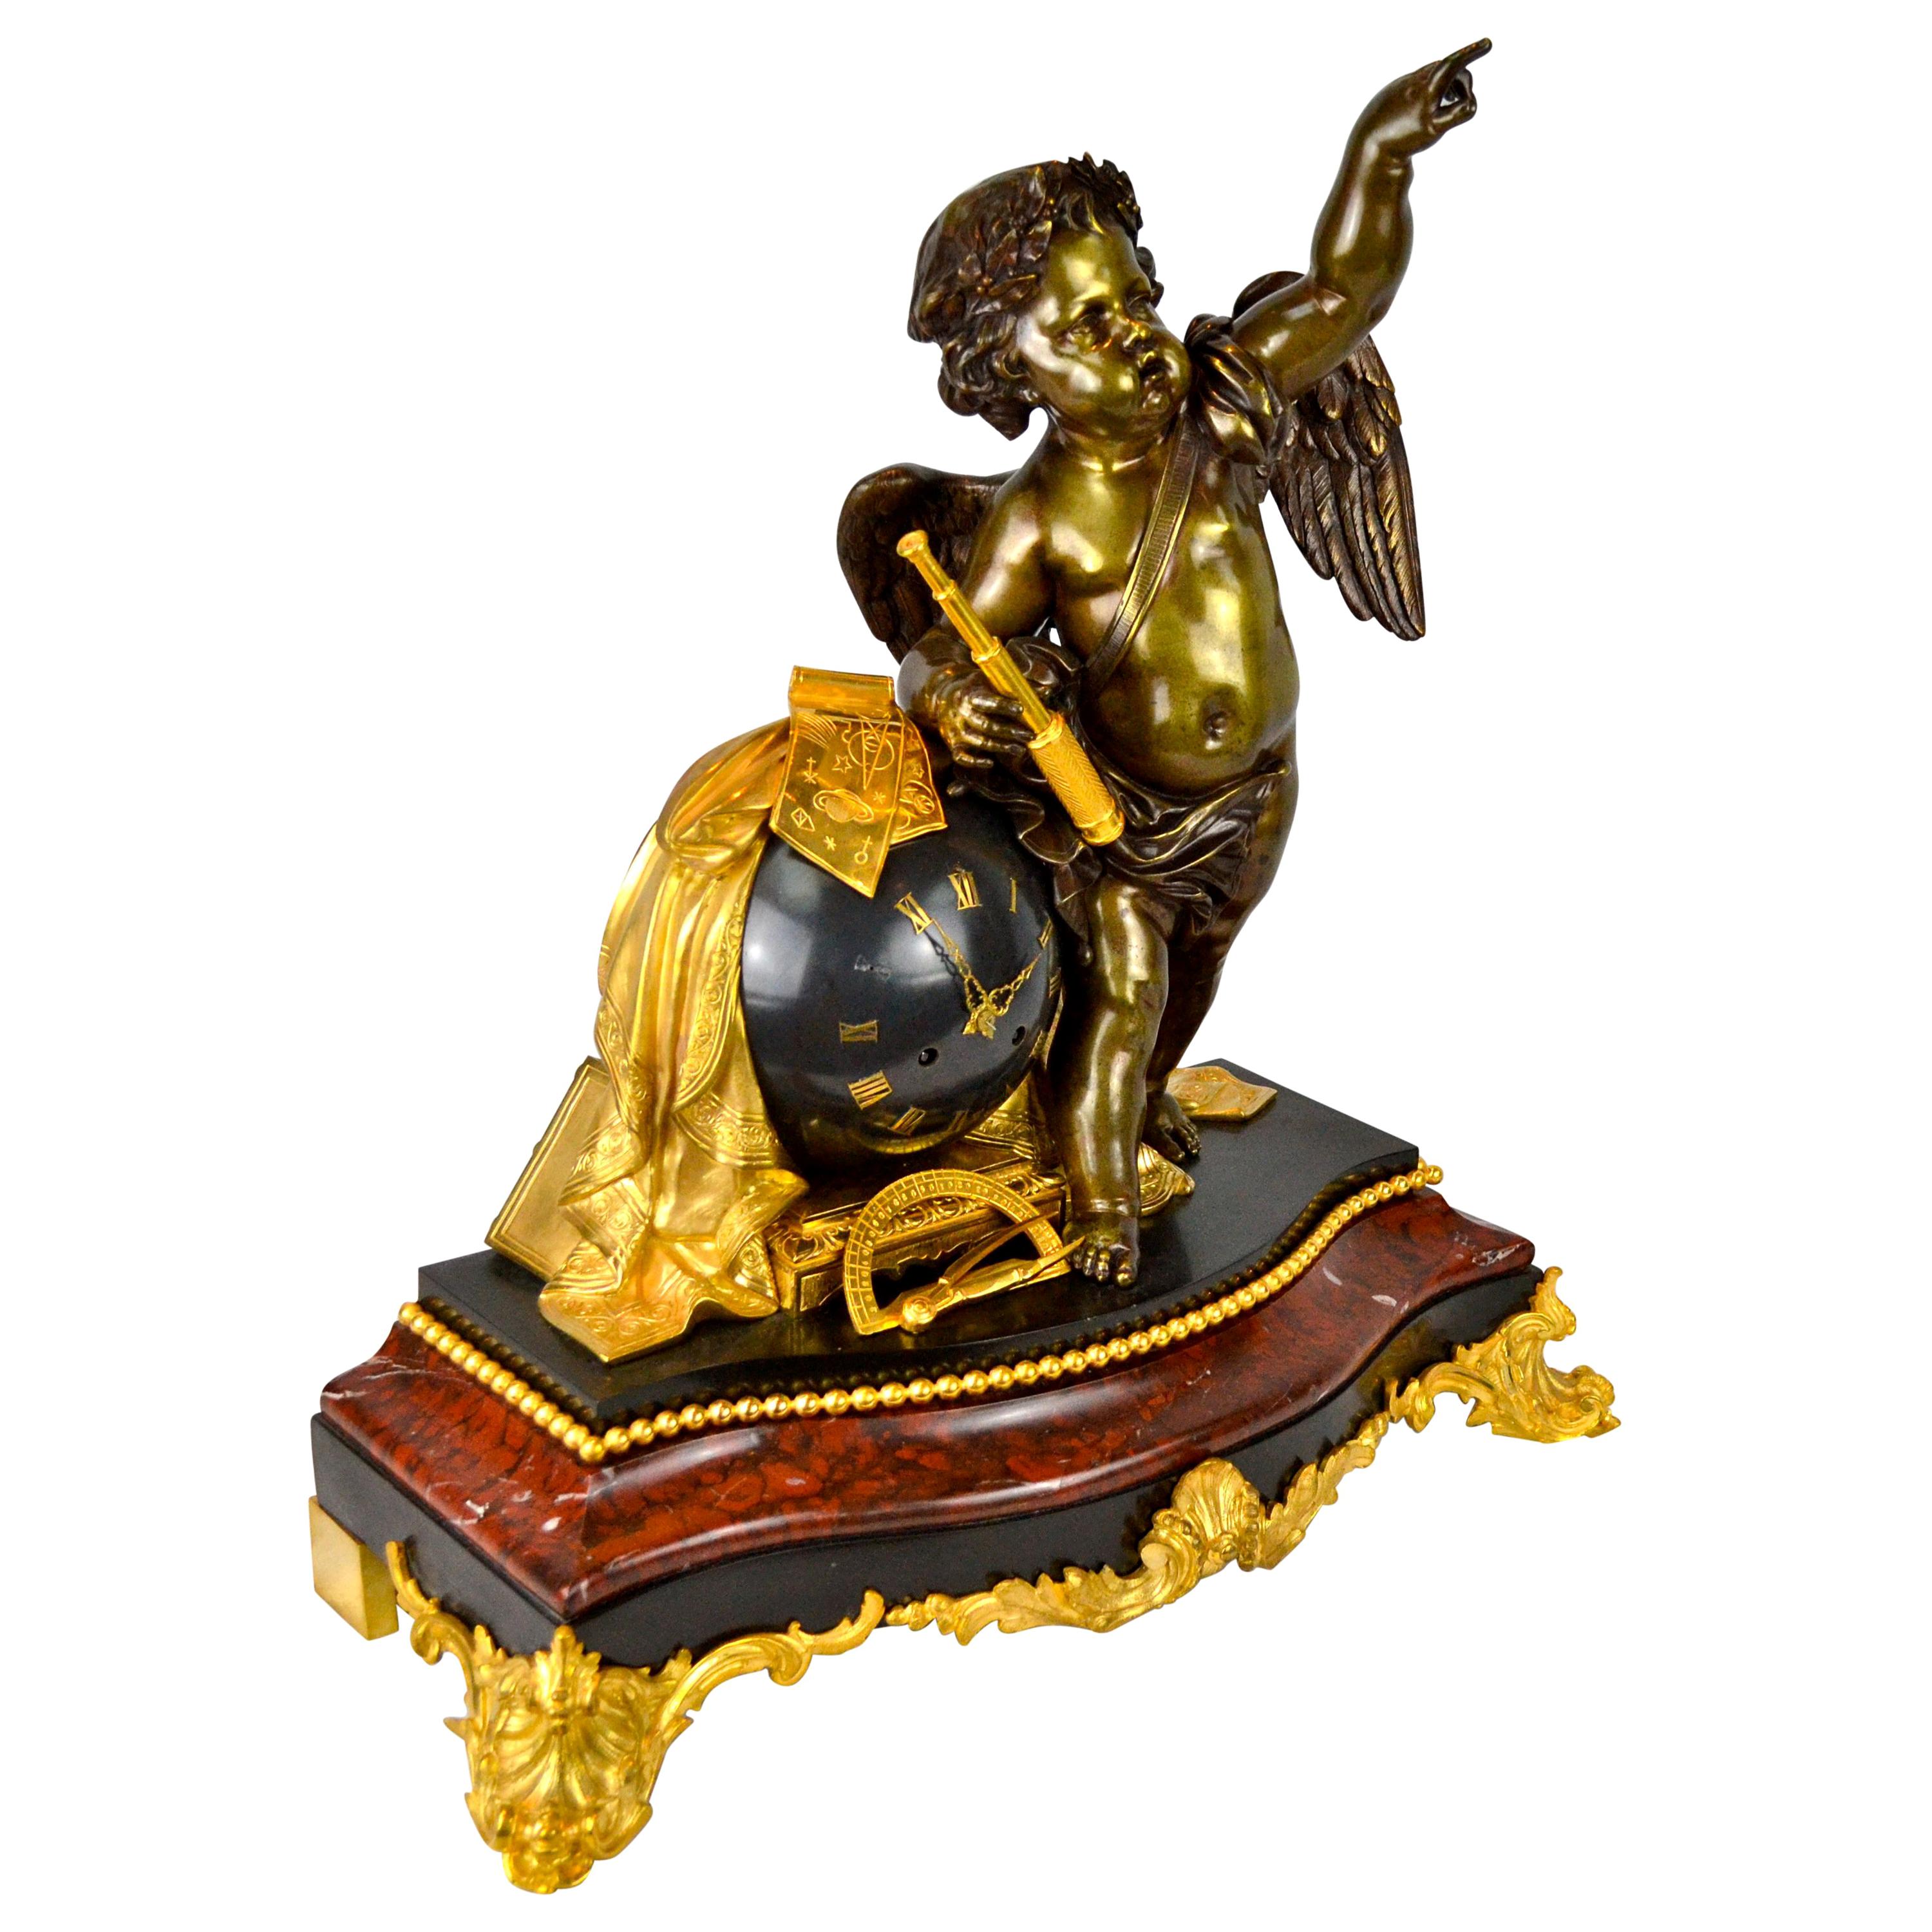 Napoleon III figural astronomical sciences clock. The patinated bronze winged putto stands beside the ‘blued’ bronze globe of the world housing the movement; he holds scientific instruments, telescope, calibers etc. in one hand and points to the